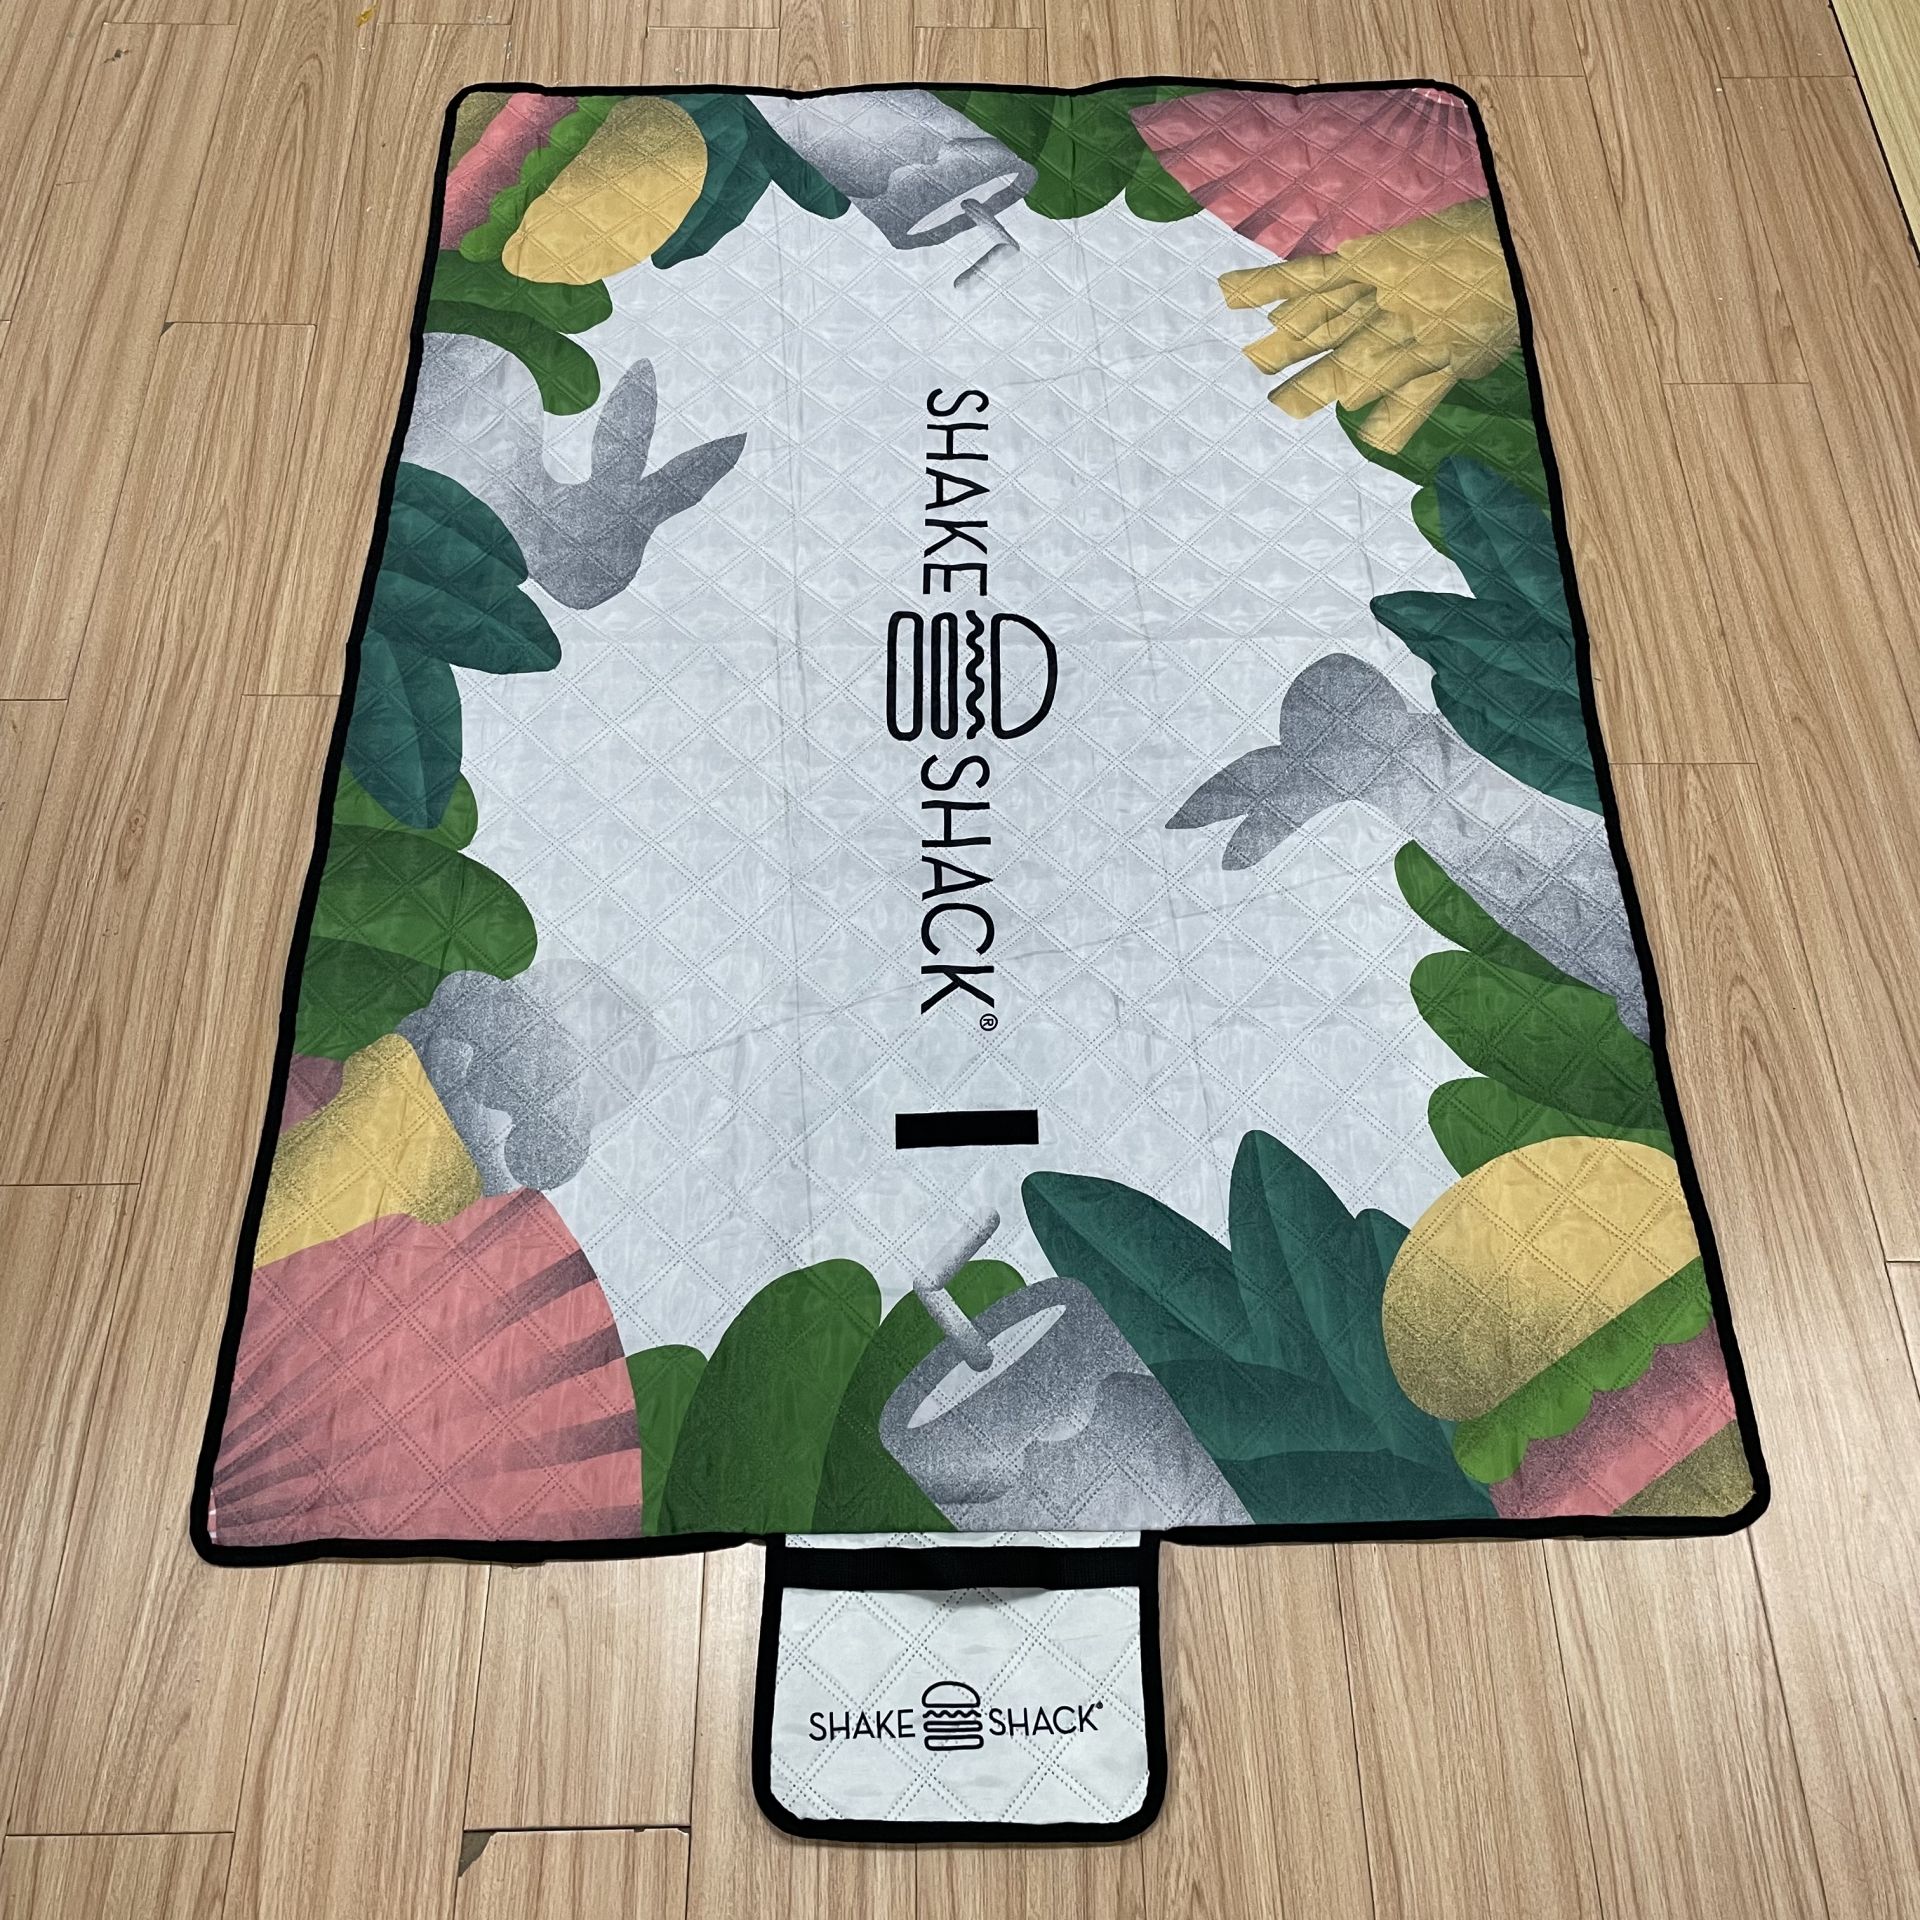 POLY PONGEE PICNIC MAT WITH ULTRA-SONIC QUILTING T